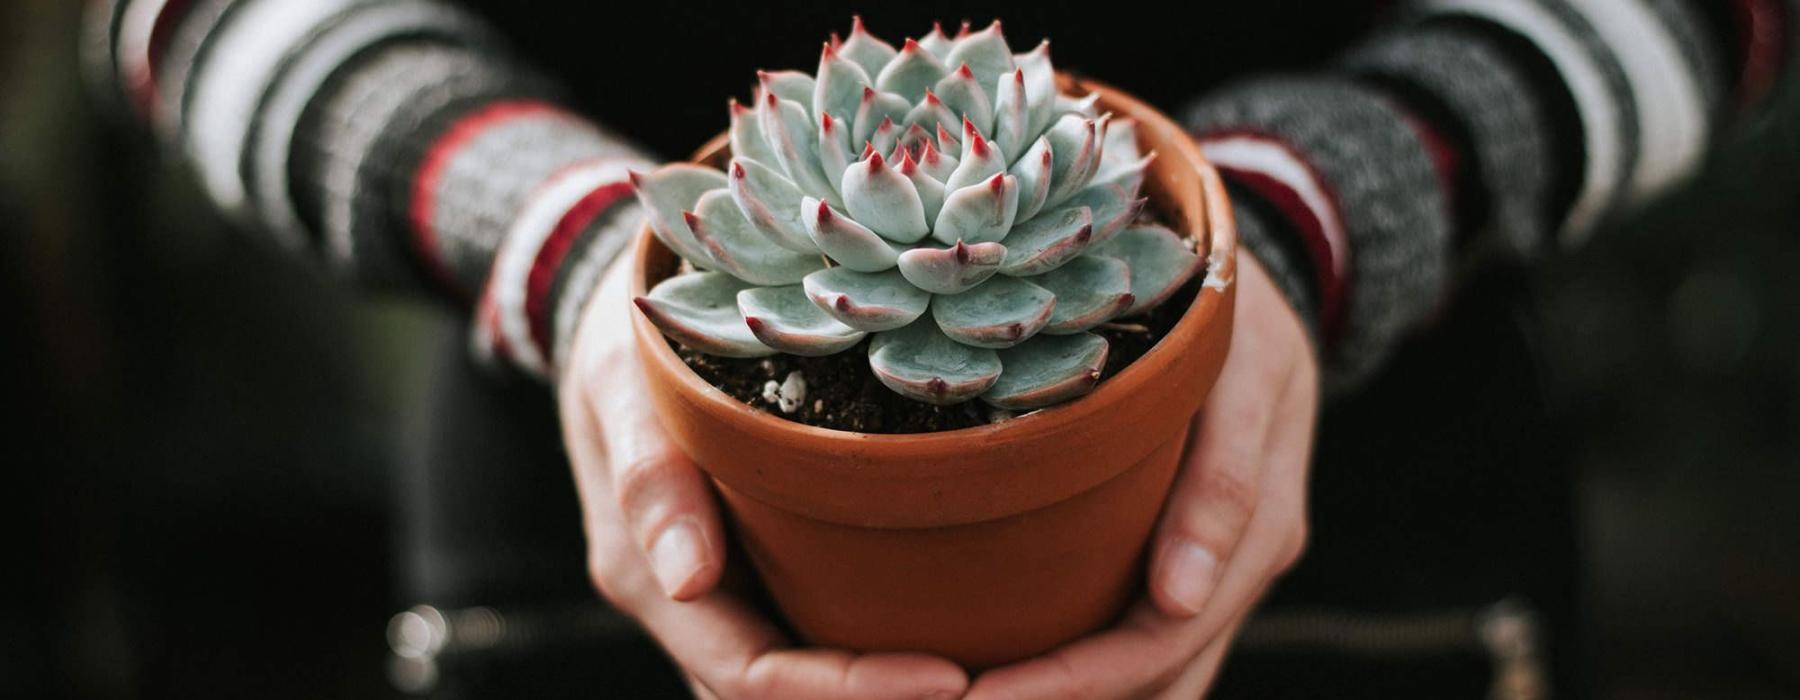 woman holding a potted succulent